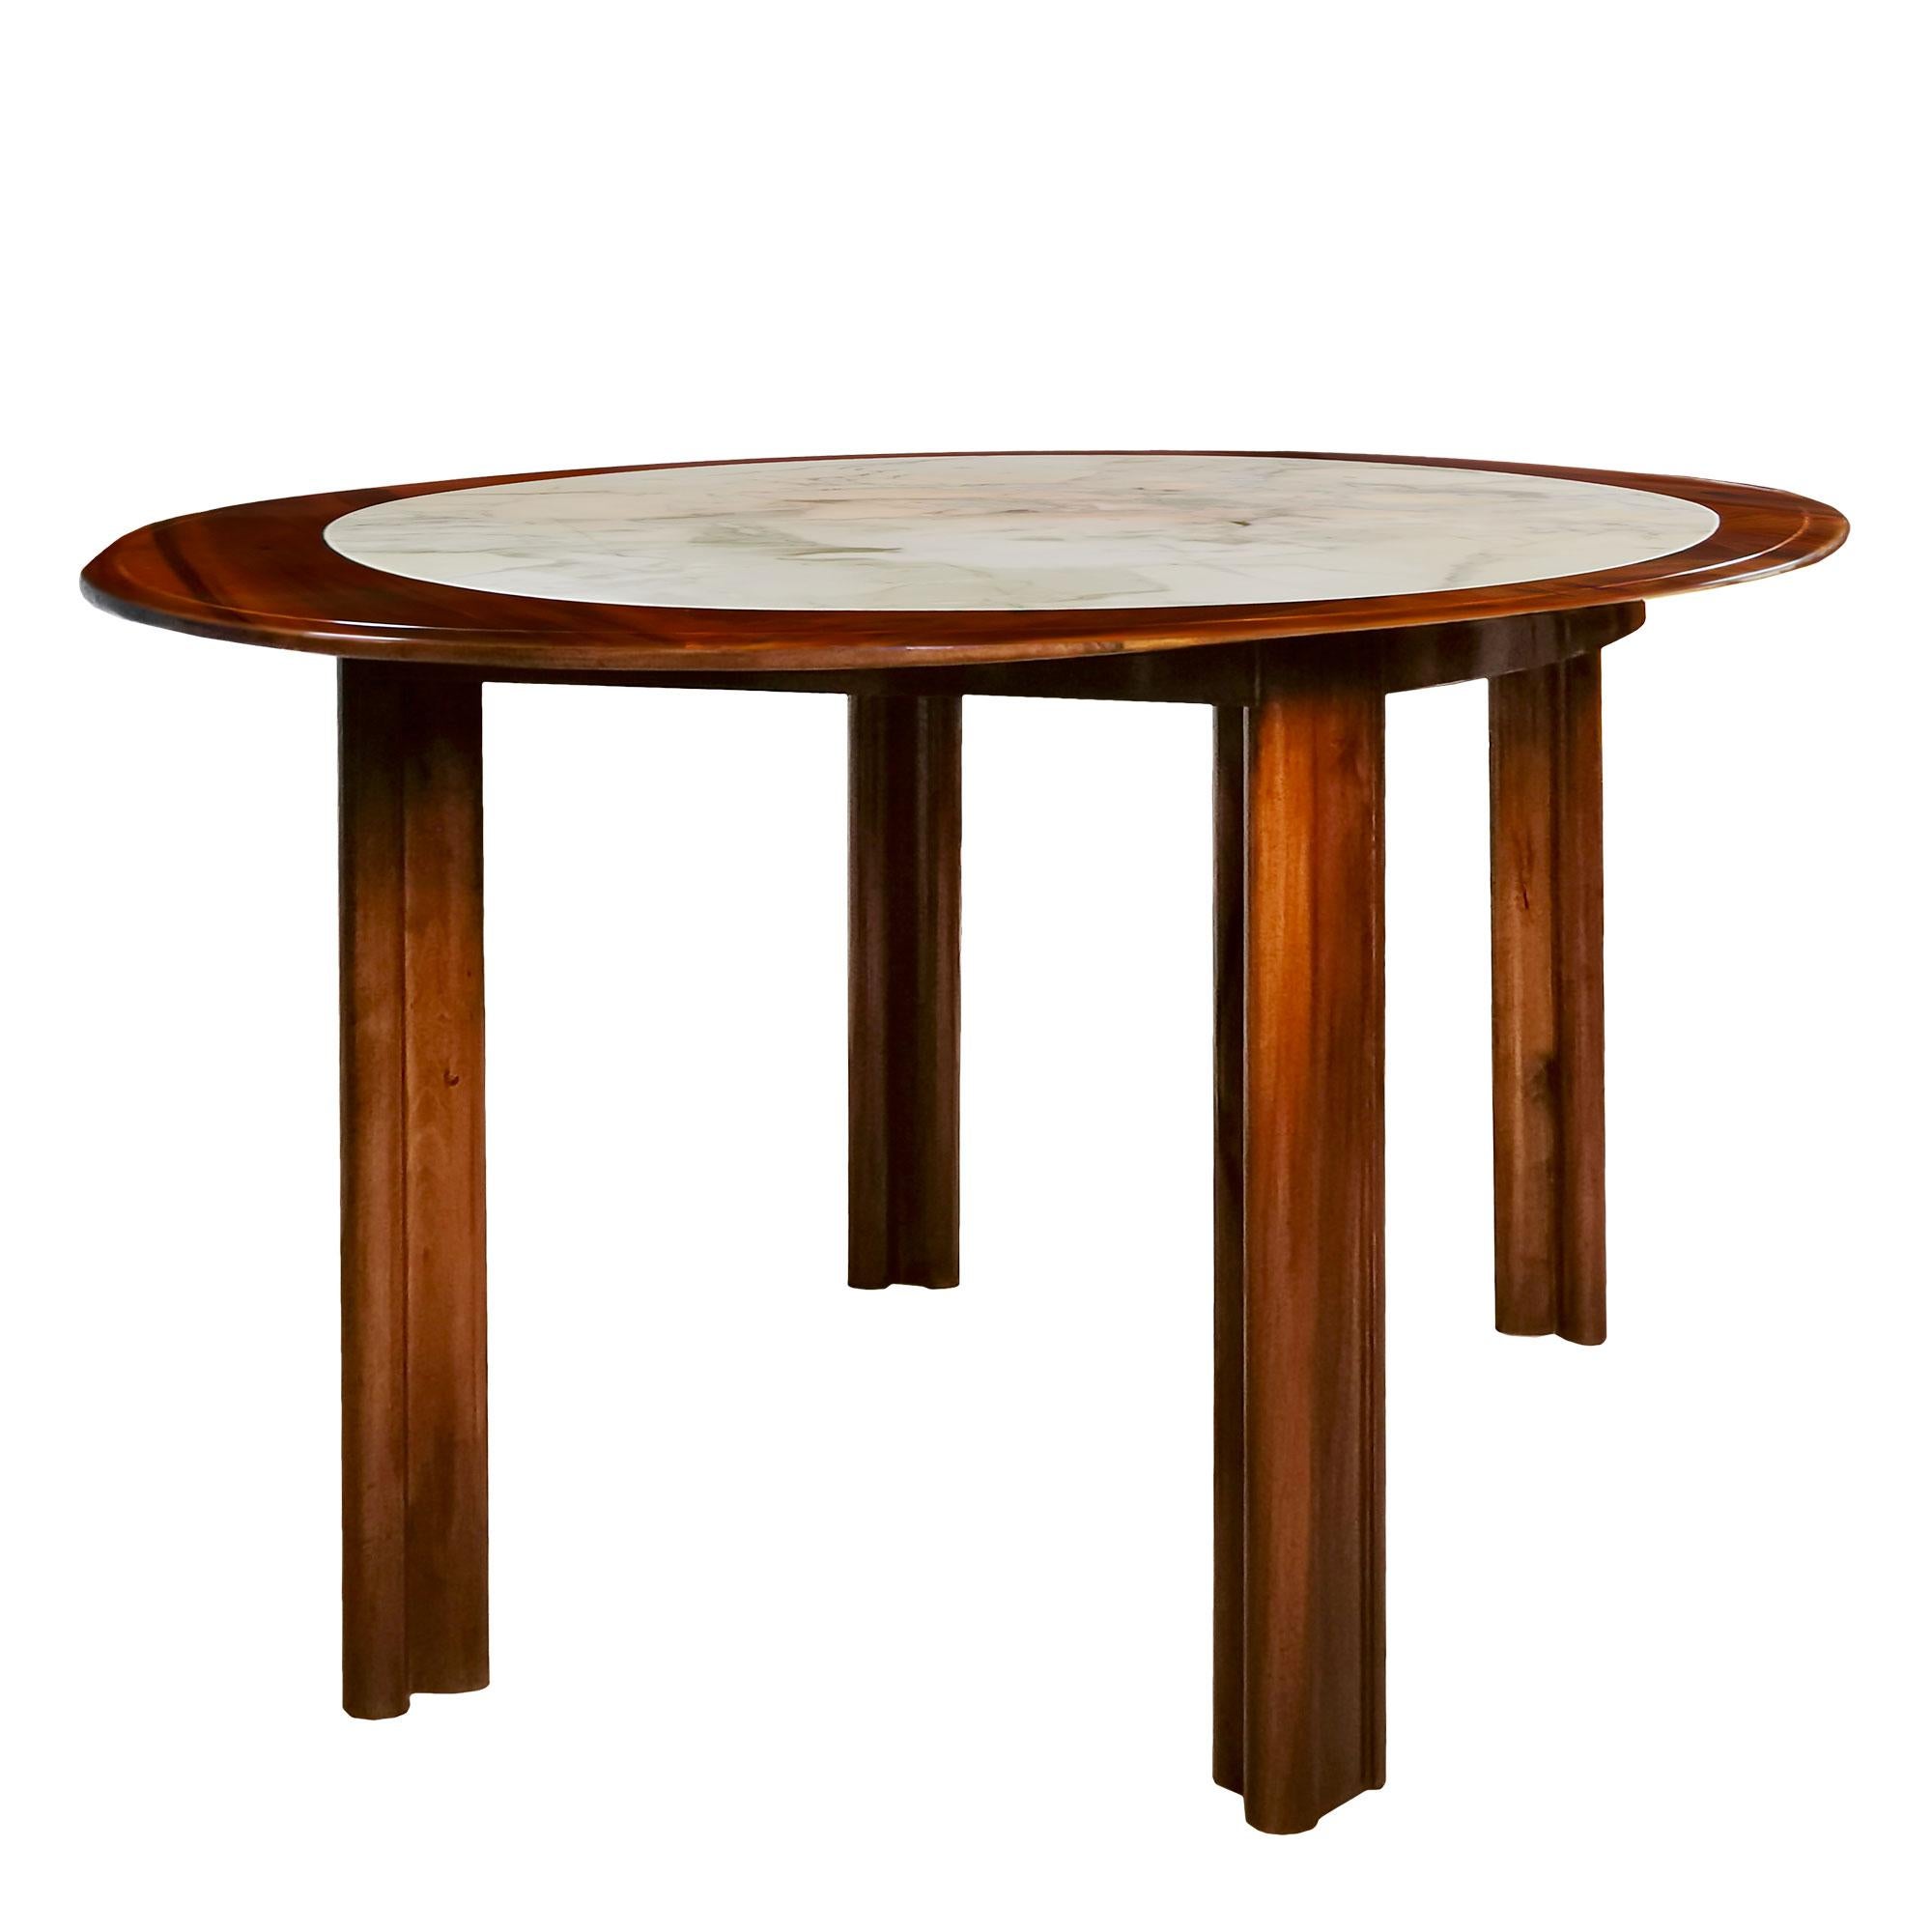 Oval table in solid walnut with 4 legs connected by a frame in the same wood which supports a large white marble top slightly veined in black. French polish.

In the style of Tobia Scarpa.

Italy around 1970.